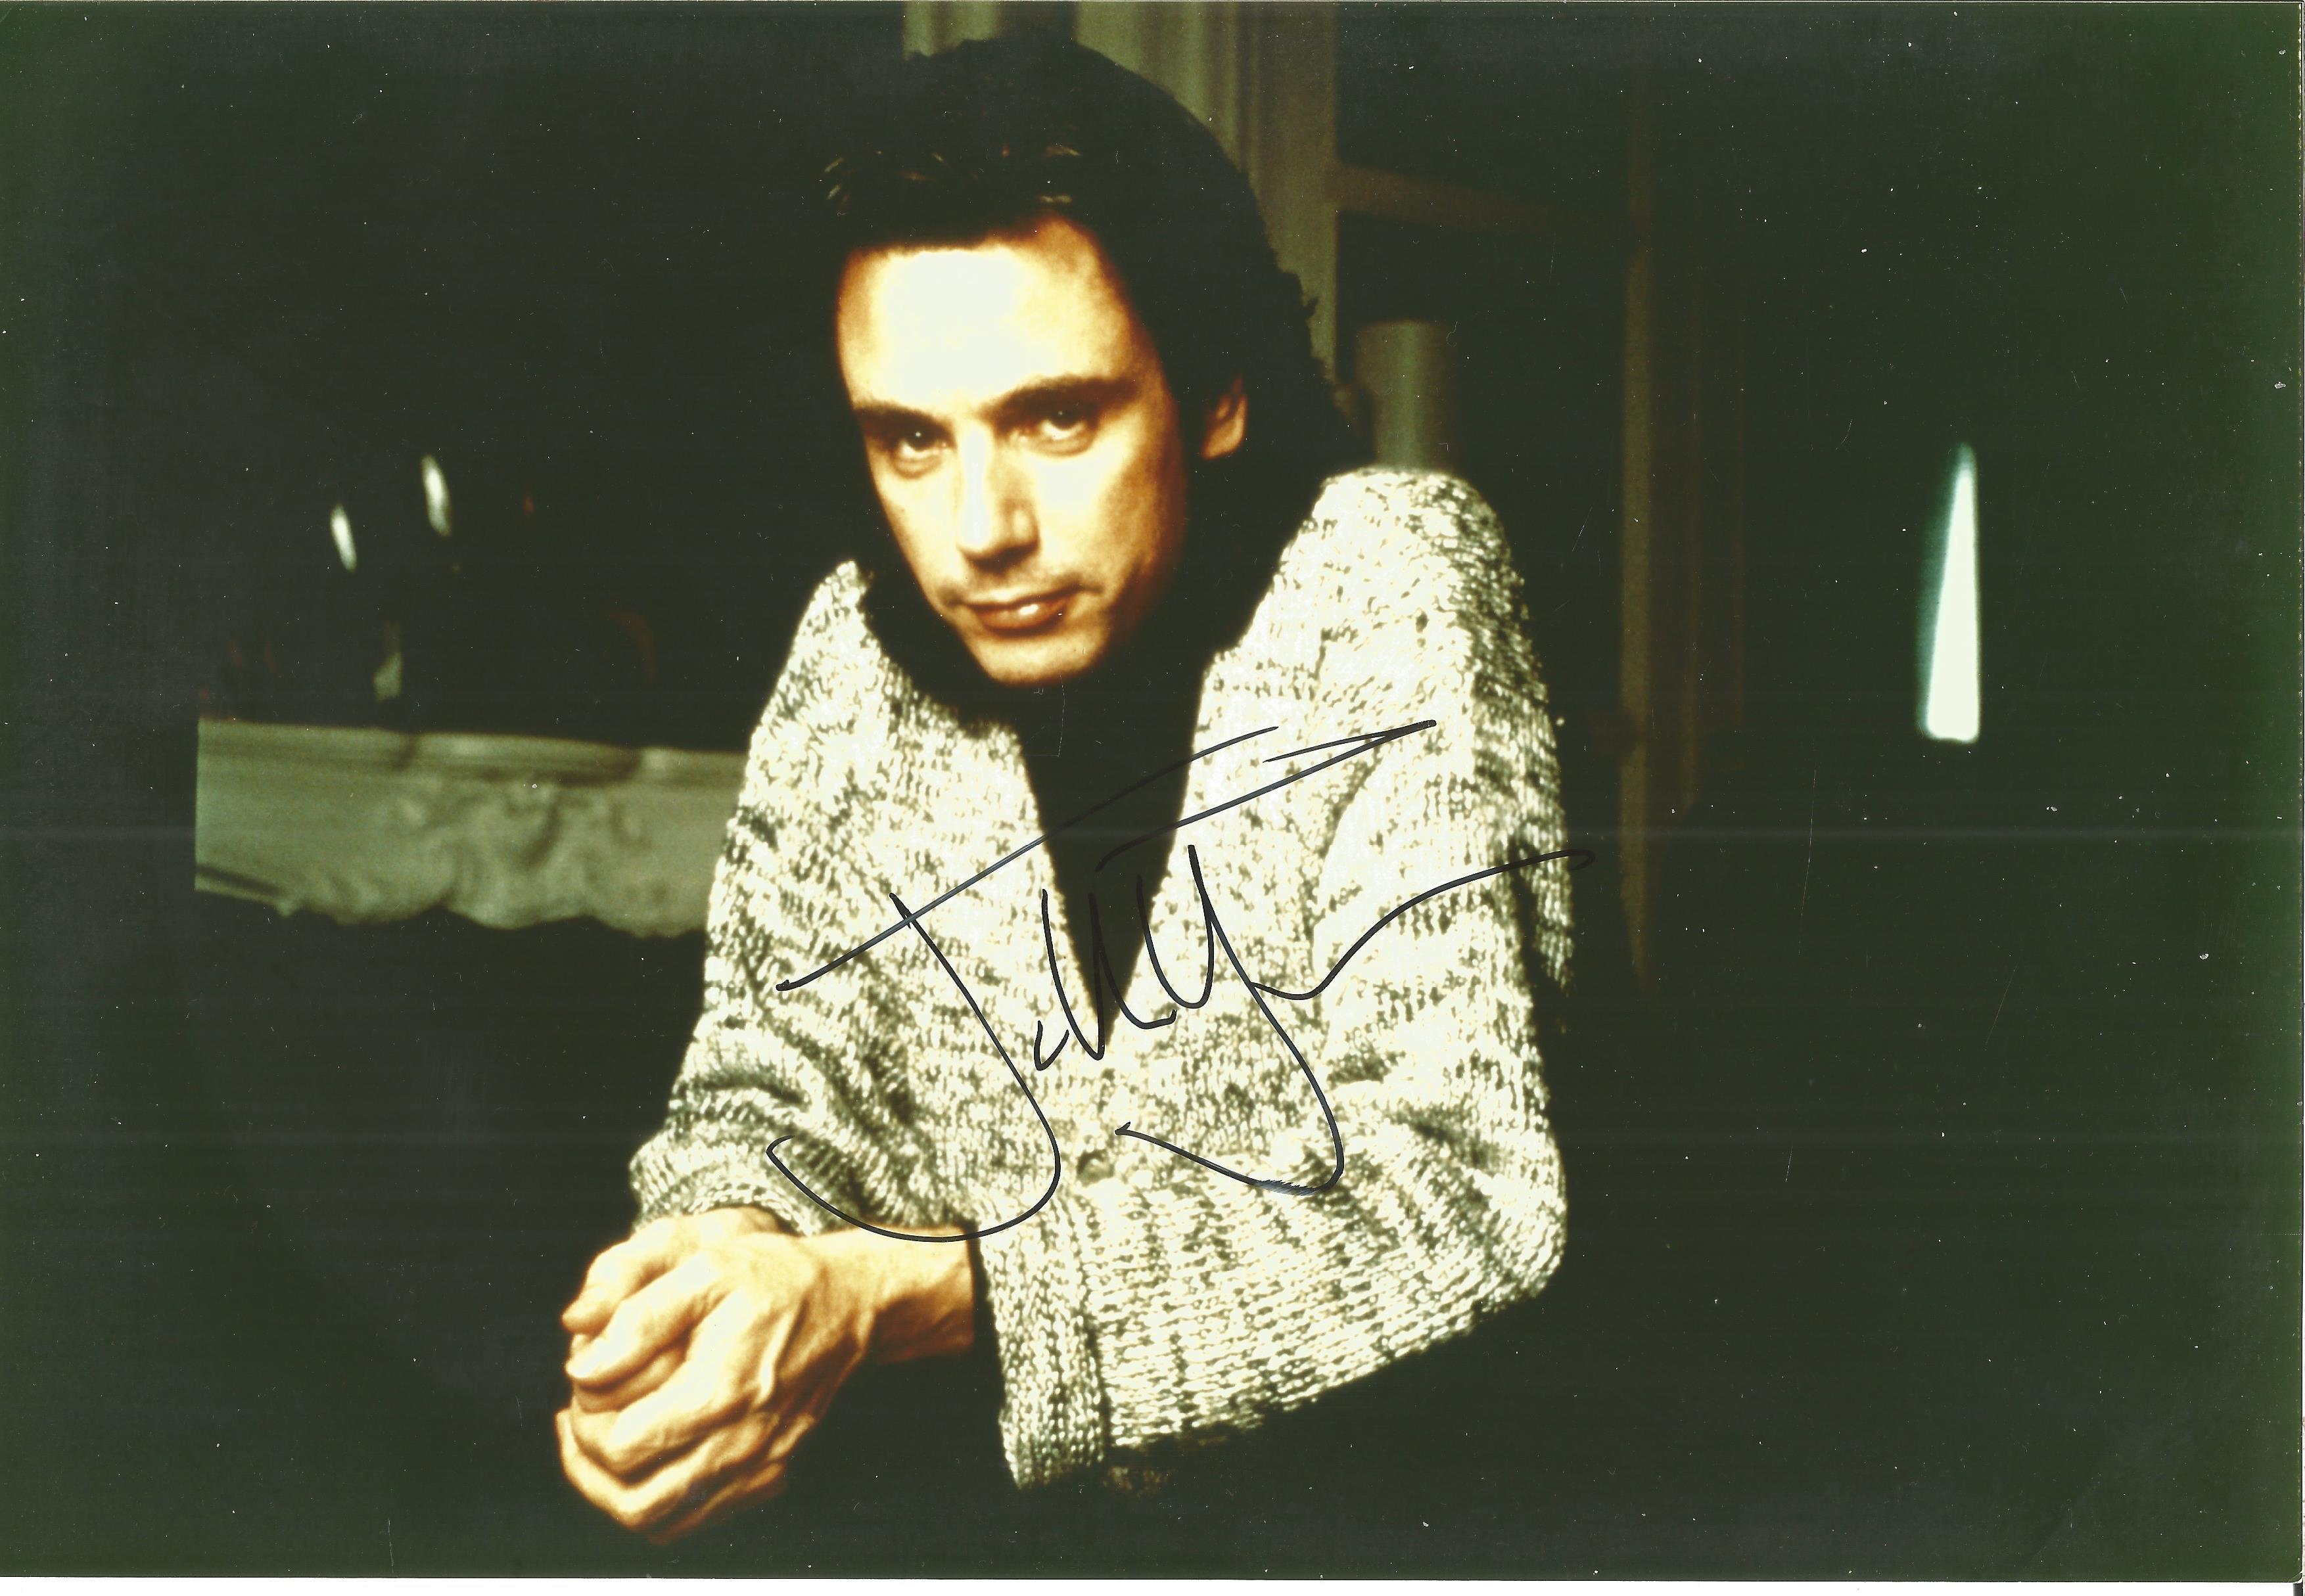 Jean Michel Jarre signed 11x8 colour photo. Good condition. All autographs come with a Certificate